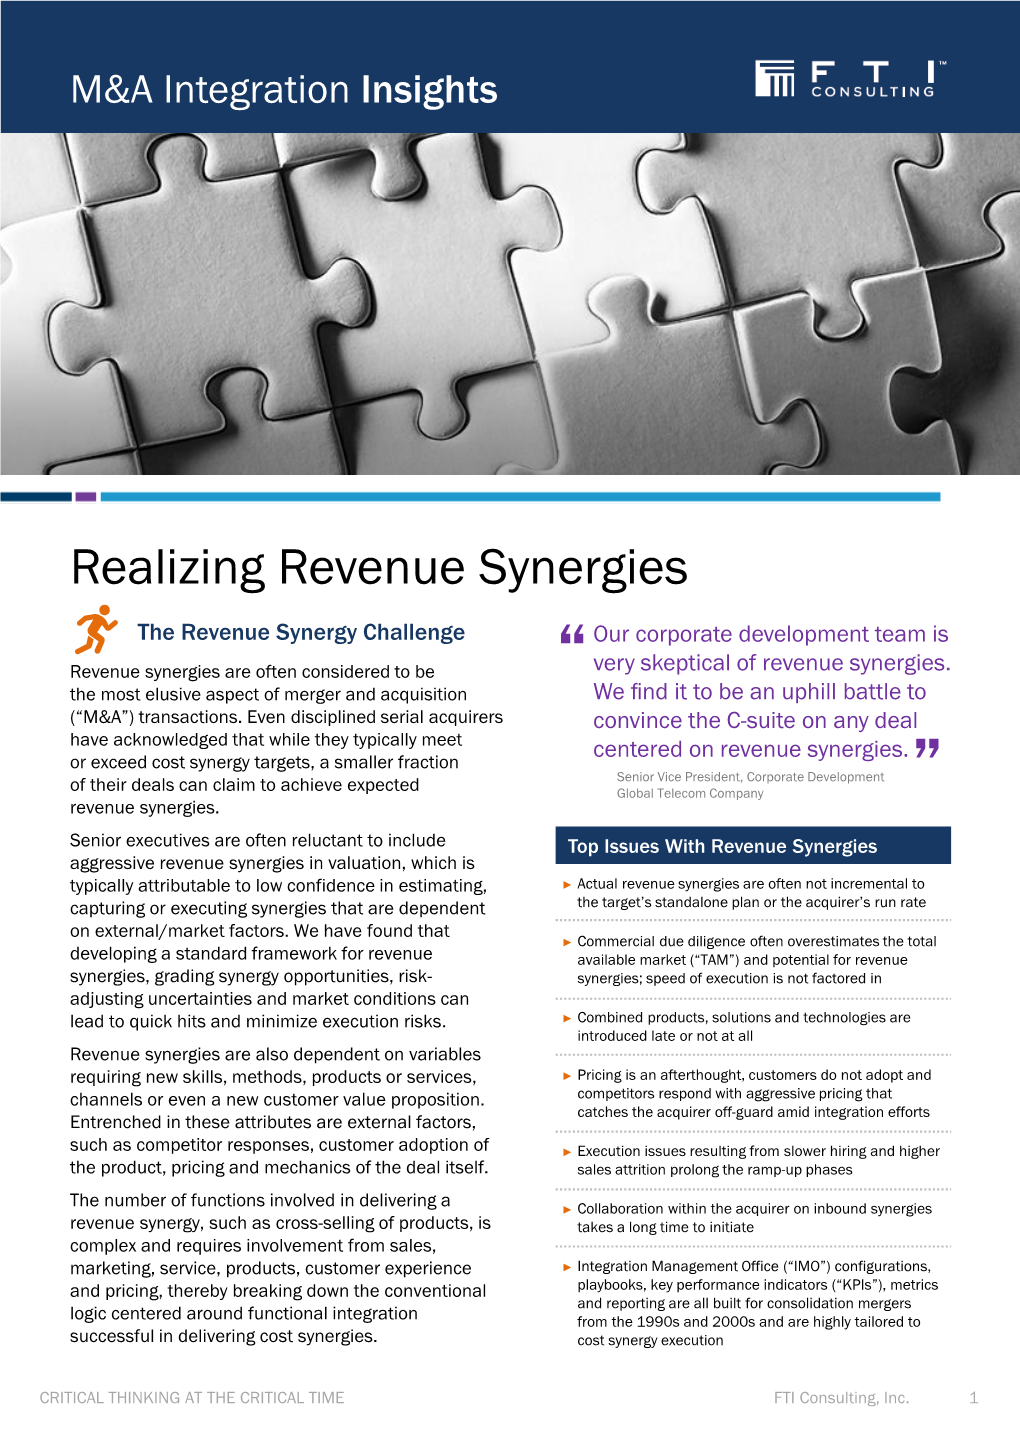 Realizing Revenue Synergies